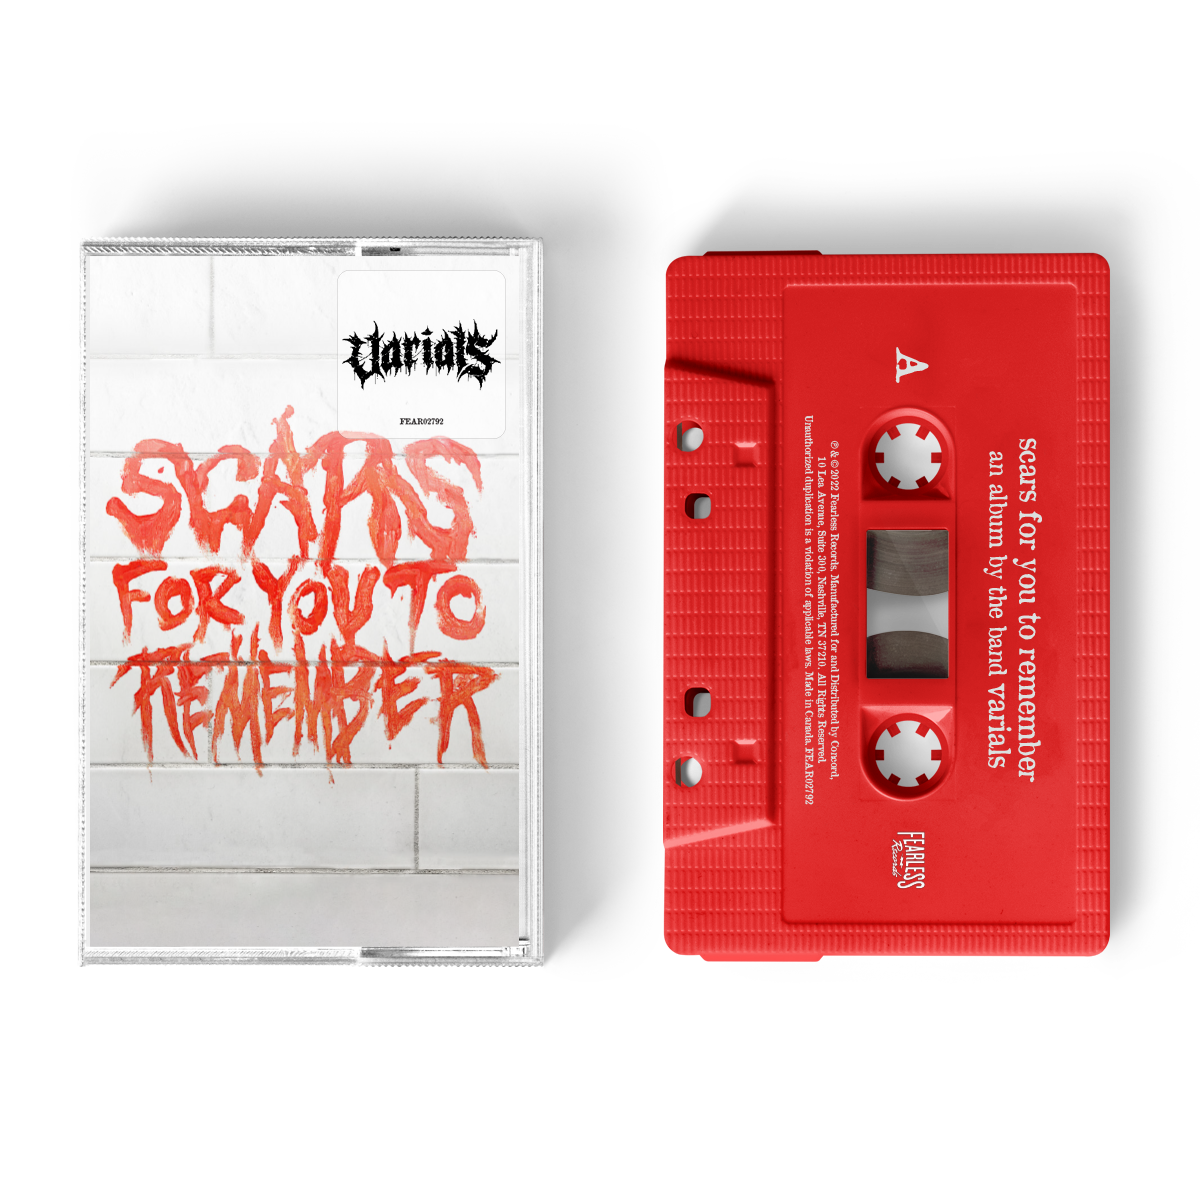 "Scars For You To Remember" Cassette